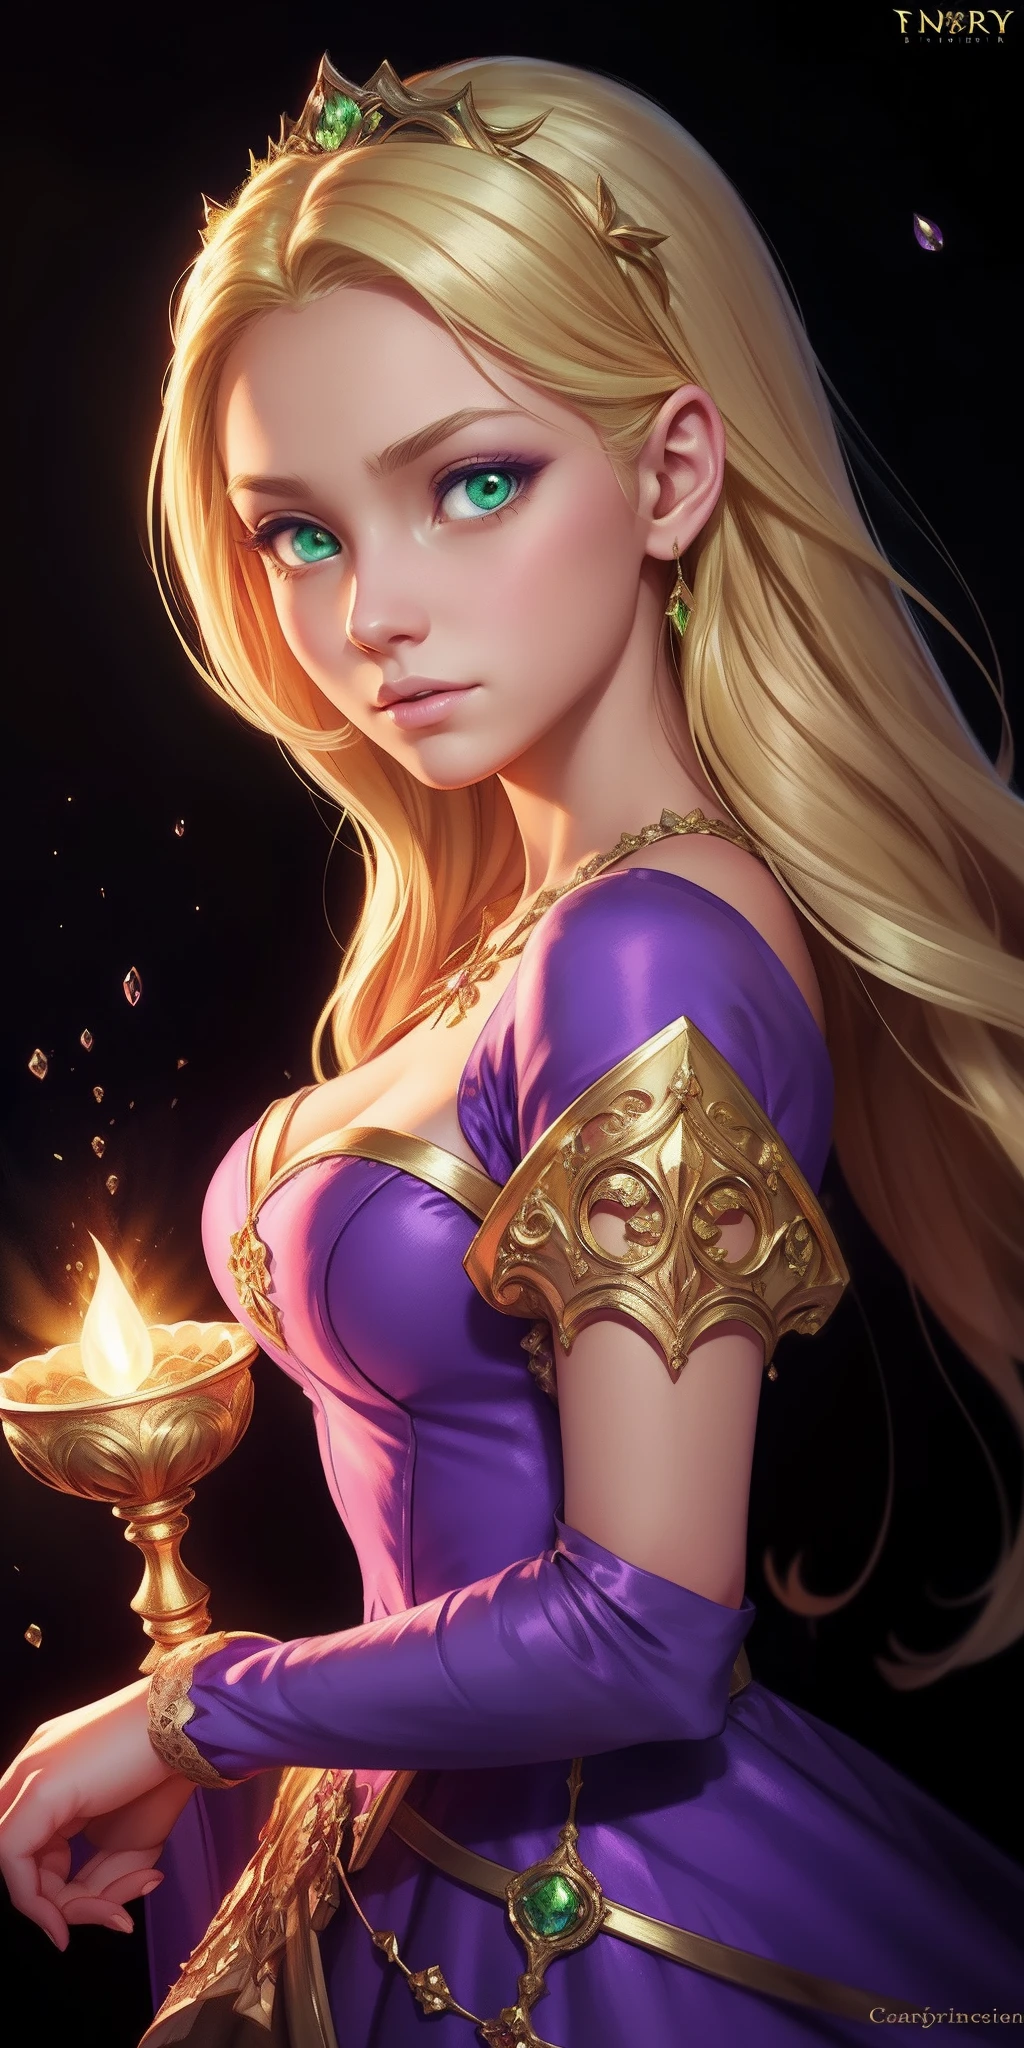 Flower Princess, Rapunzel, Beautiful, Glowing yellow glow, Long blonde hair, Green eyes, Lilac dress, Green ivy, Nice young face, Soft tan skin,Art germ, Ultra-detailed and sophisticated Gothic art trends in Artstation's ternary colors, Fantastical, intricately details, Splash screen, Complementary colors, fantasy concept art,